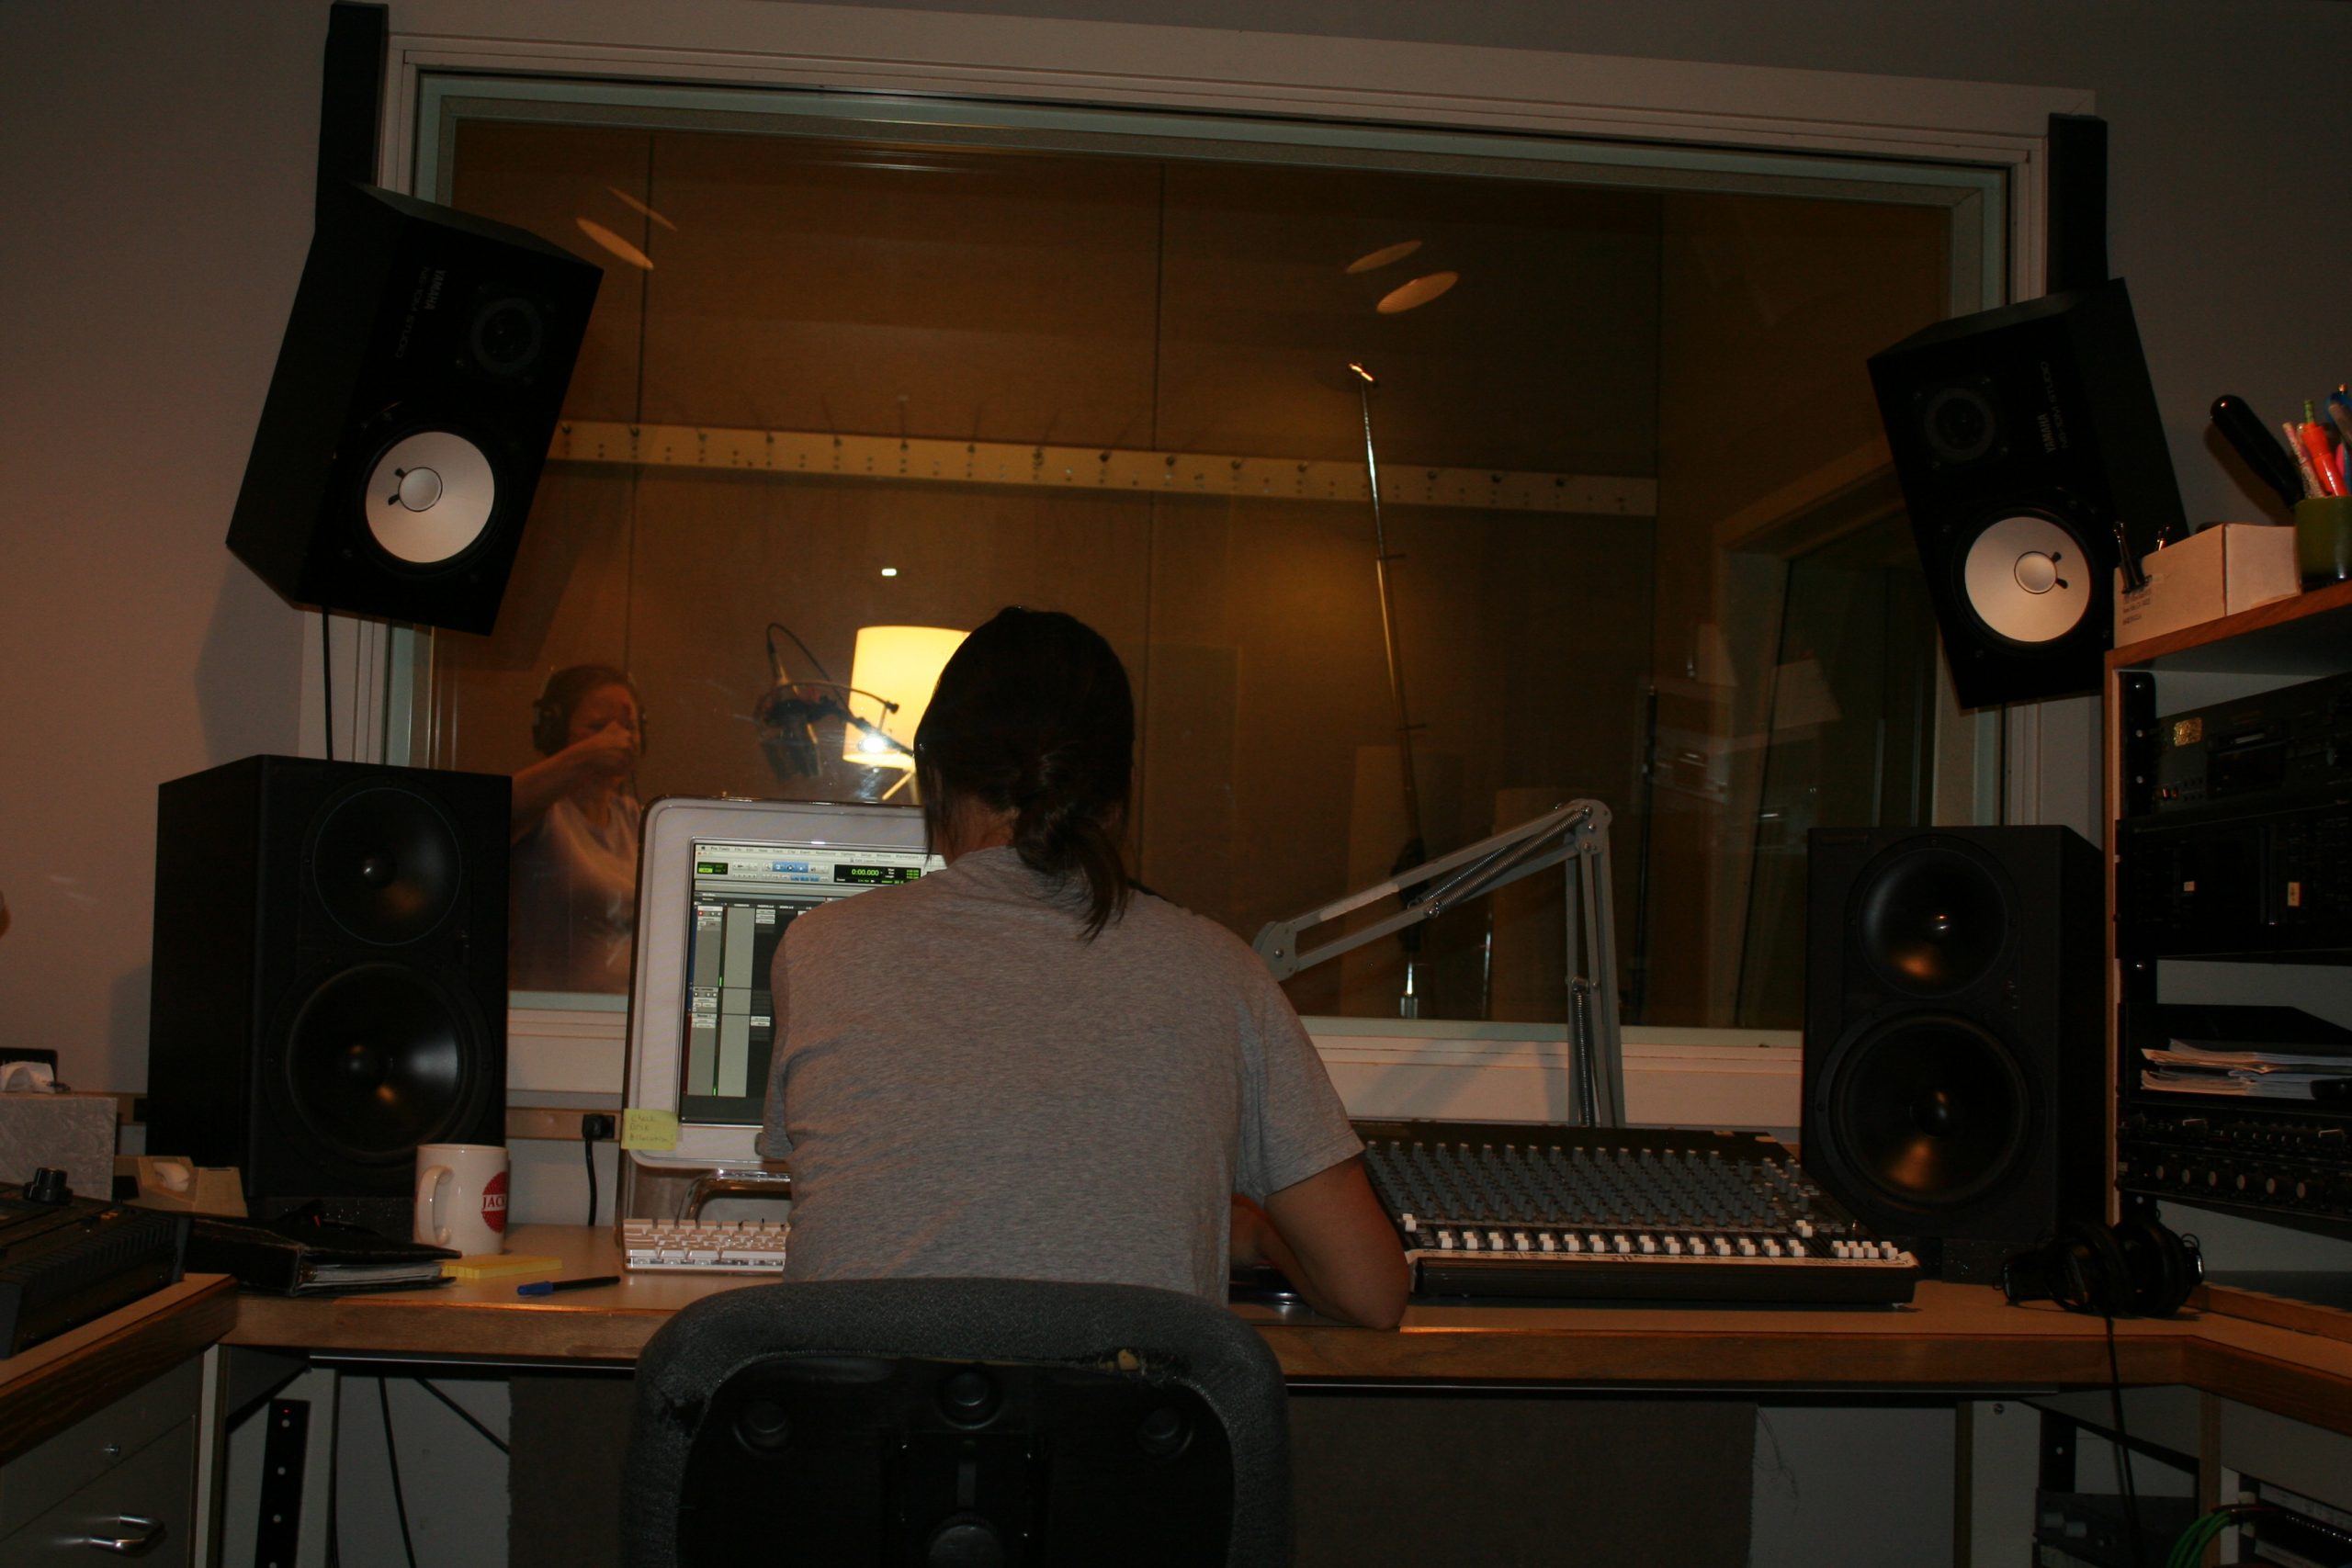 Laurie giving thumbs up at the studio recording